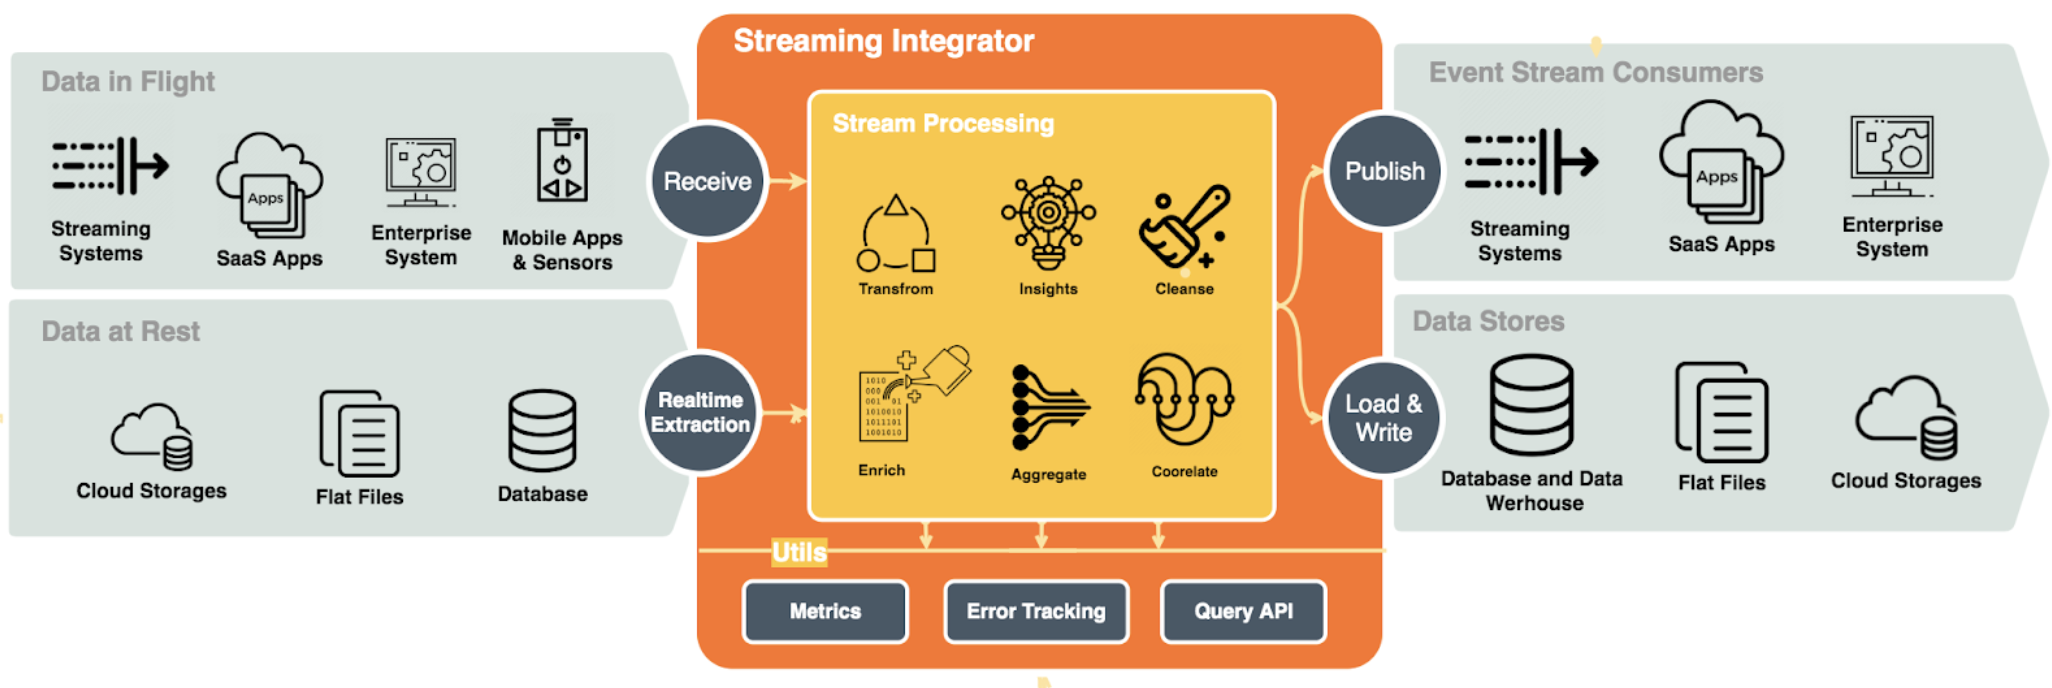 Streaming Integrator Use cases